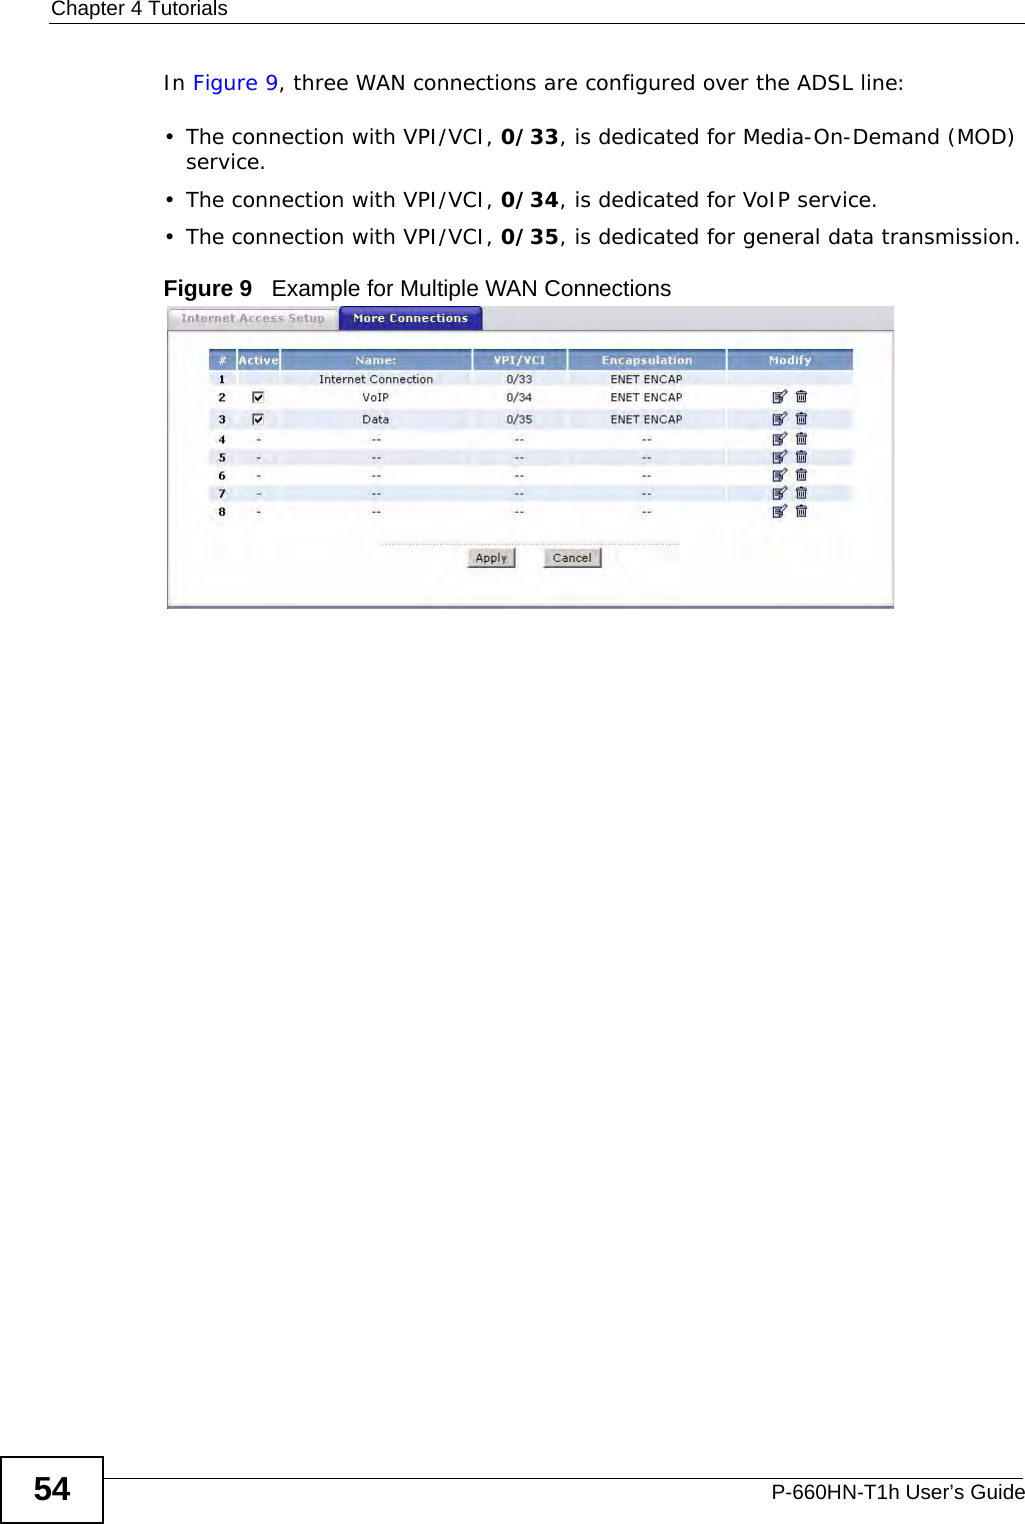 Chapter 4 TutorialsP-660HN-T1h User’s Guide54In Figure 9, three WAN connections are configured over the ADSL line:• The connection with VPI/VCI, 0/33, is dedicated for Media-On-Demand (MOD) service.• The connection with VPI/VCI, 0/34, is dedicated for VoIP service.• The connection with VPI/VCI, 0/35, is dedicated for general data transmission.Figure 9   Example for Multiple WAN Connections